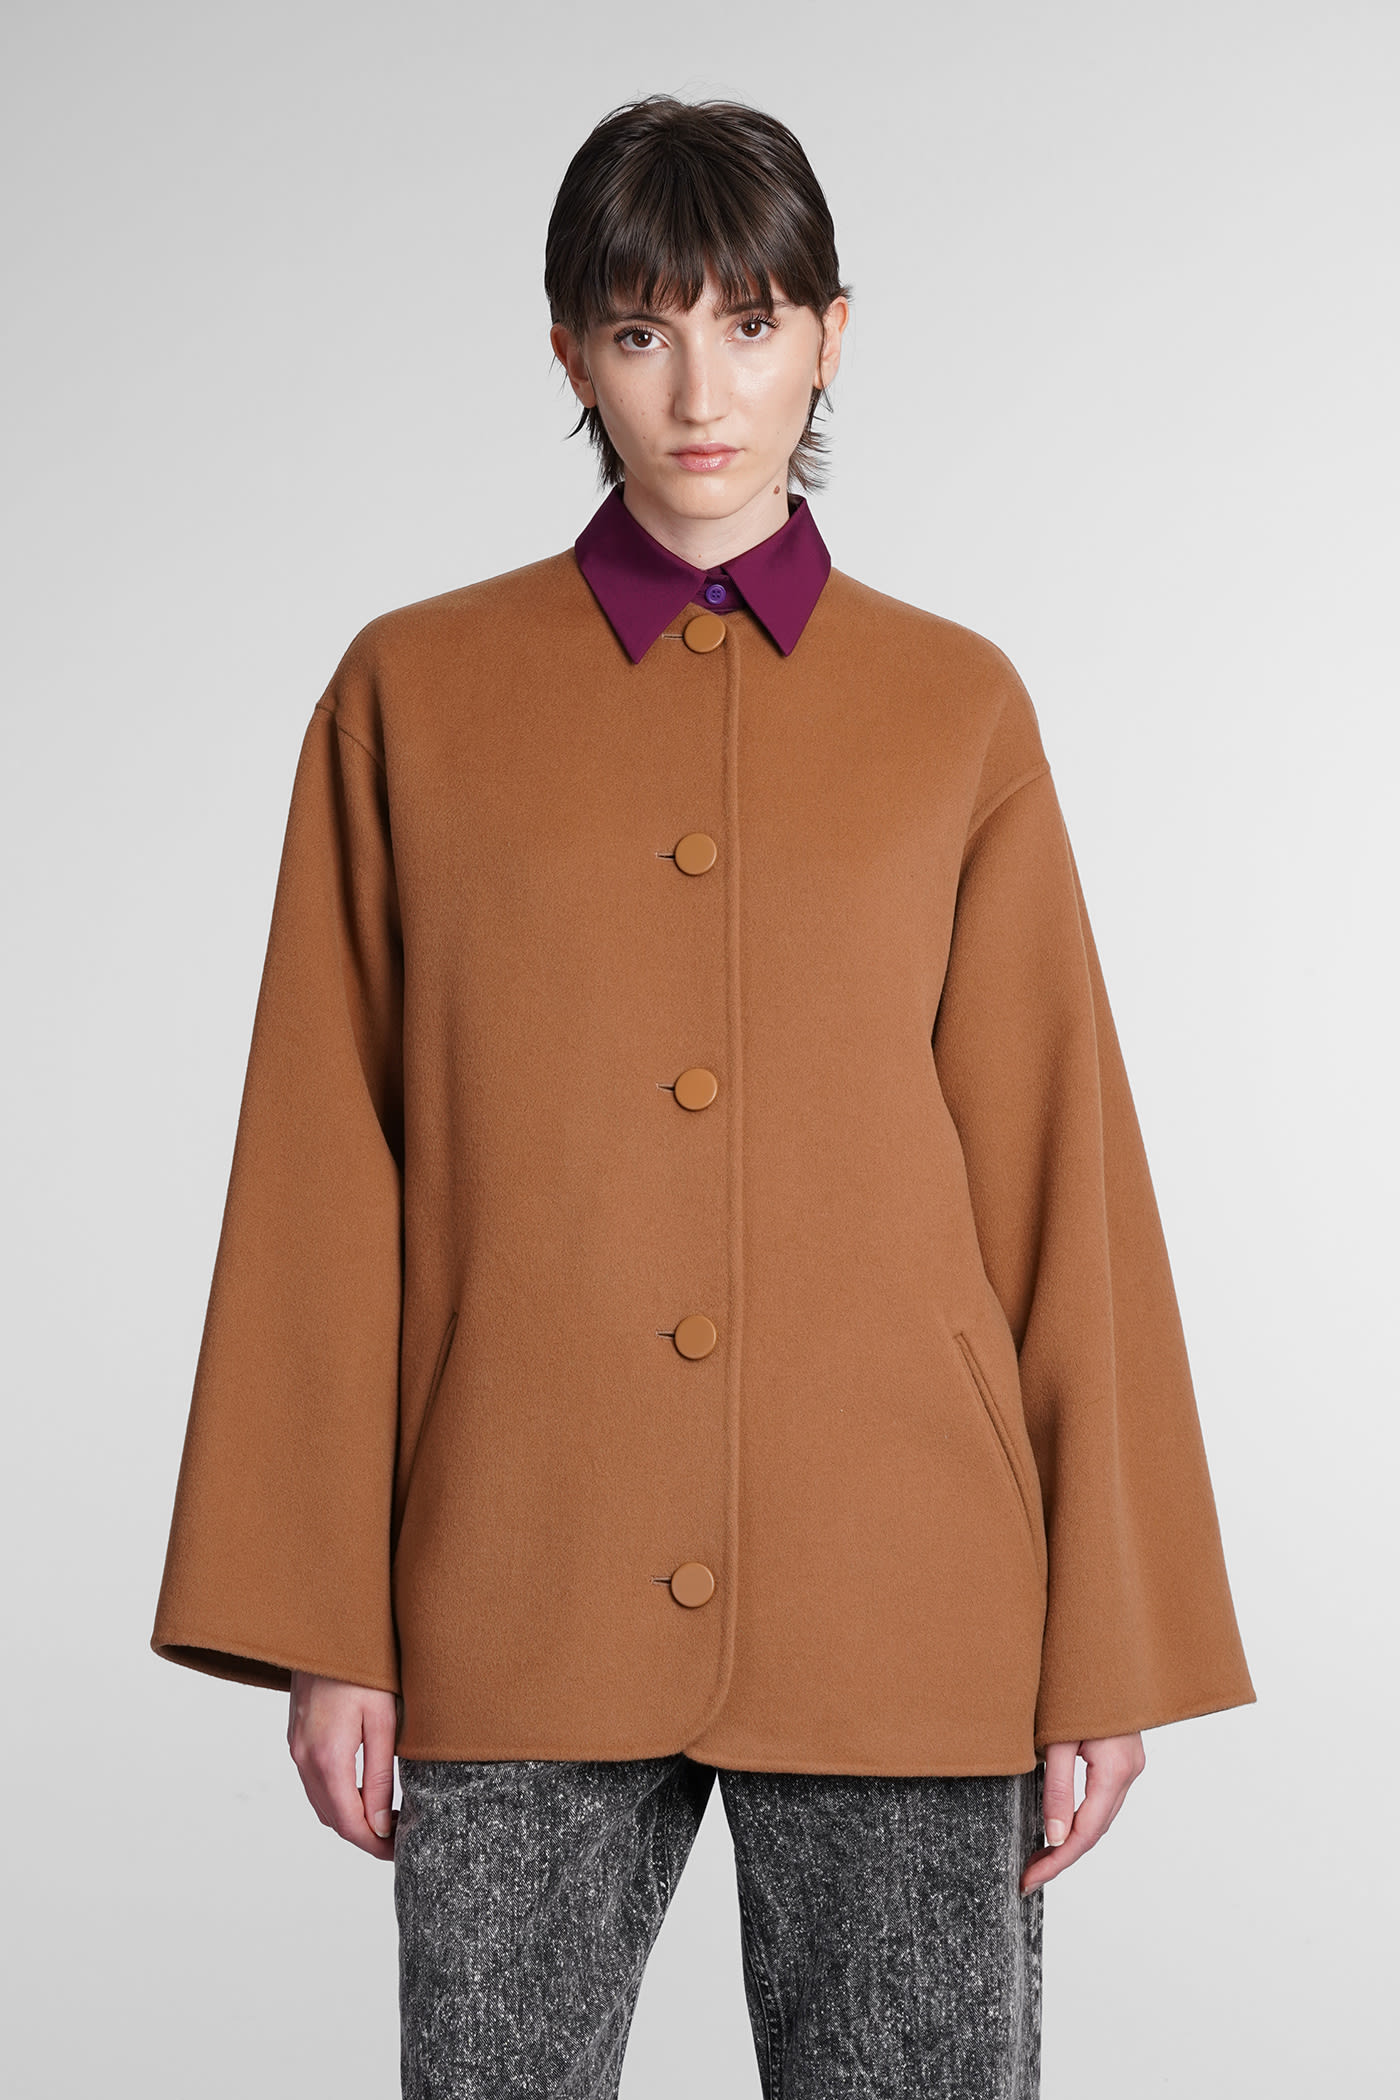 Marni Coat In Leather Color Wool